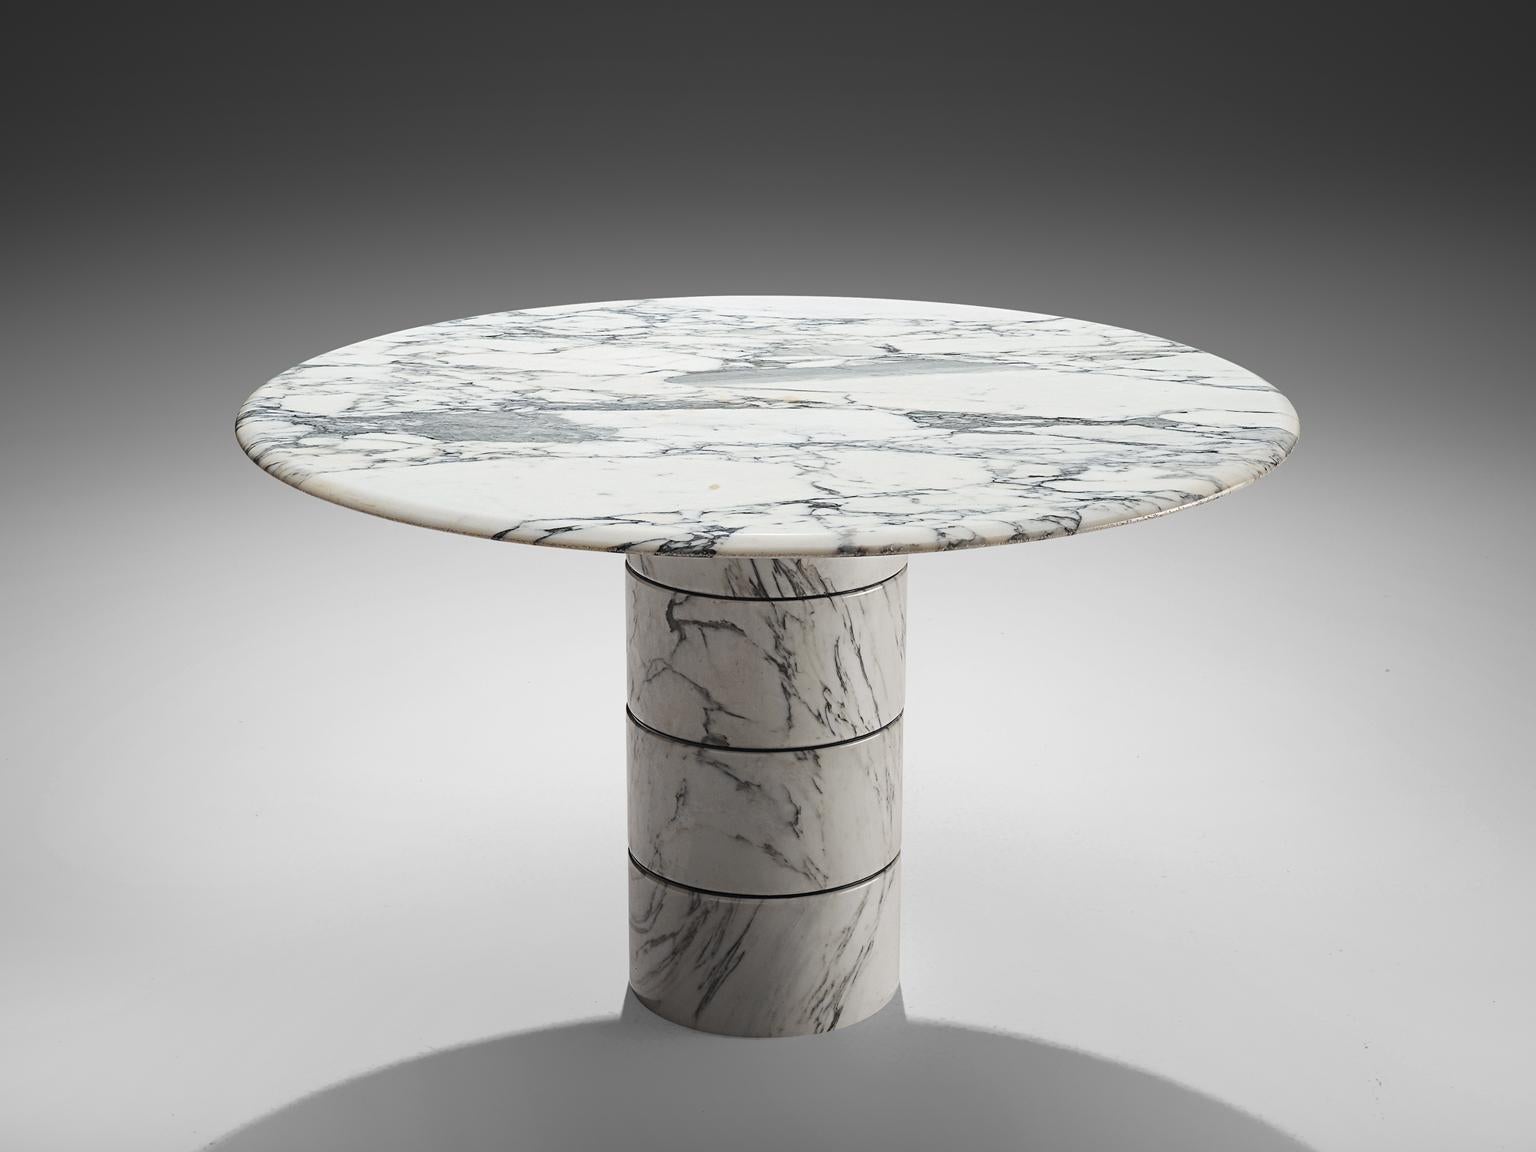 Dining table, marble, Italy, 1970s. 

This architectural table is a skillful example of postmodern design. The circular table has a soft edges edge and rests on a thick, robust single foot. This foot features no joints or clamps and is